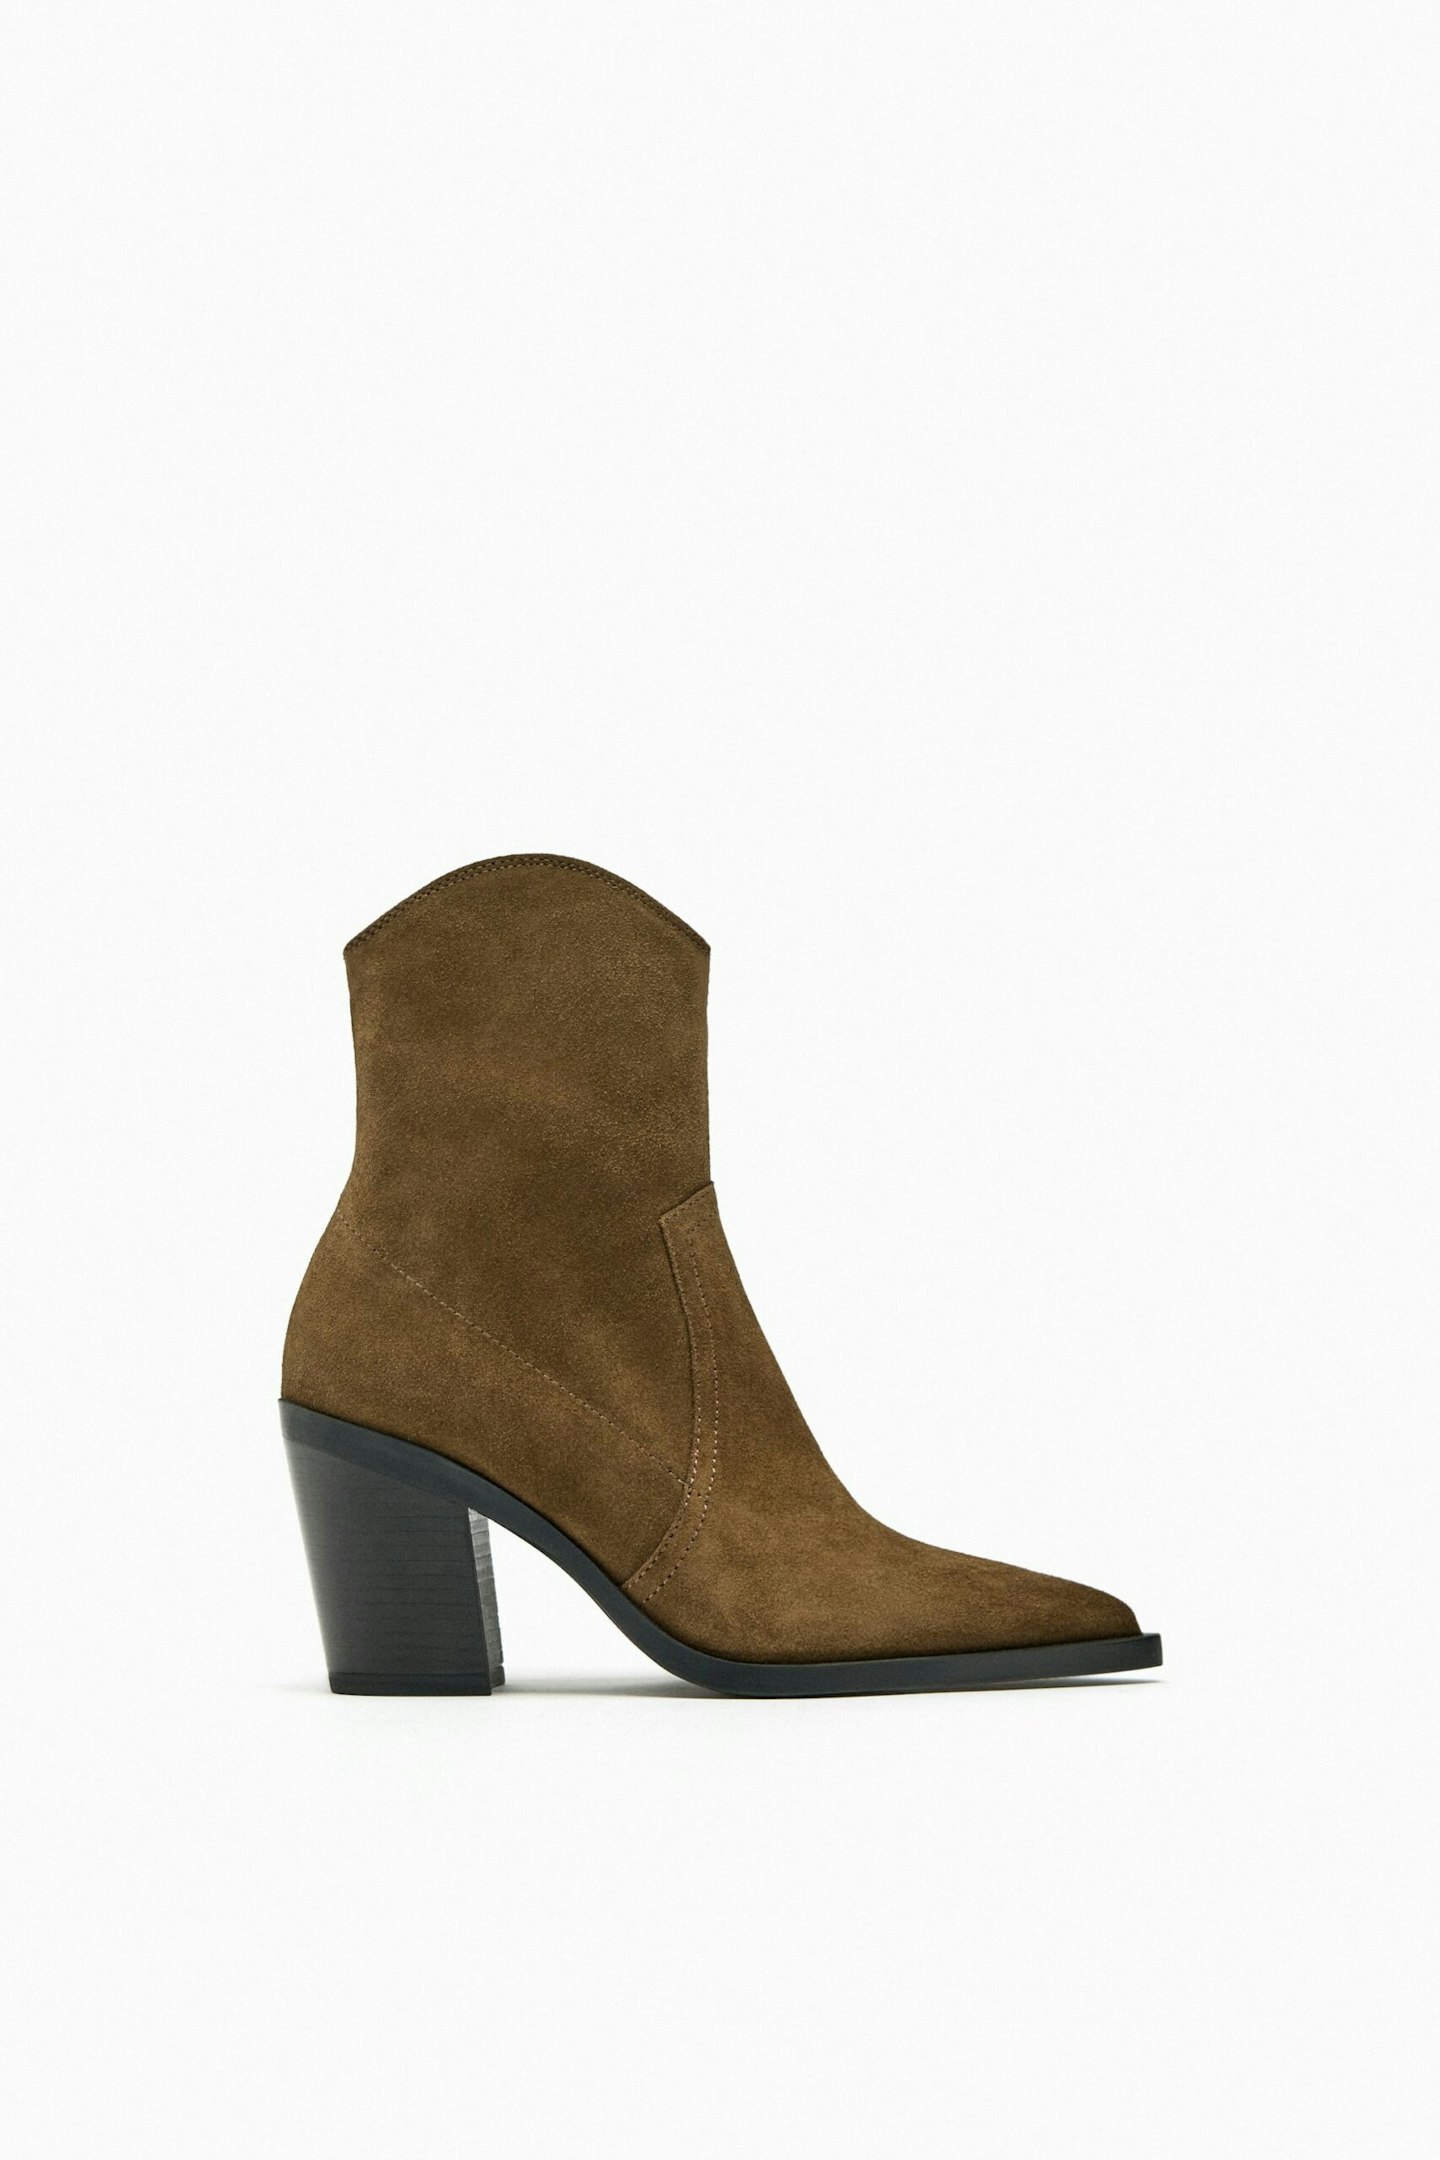 Zara, Leather Cowboy-Heel Ankle Boots